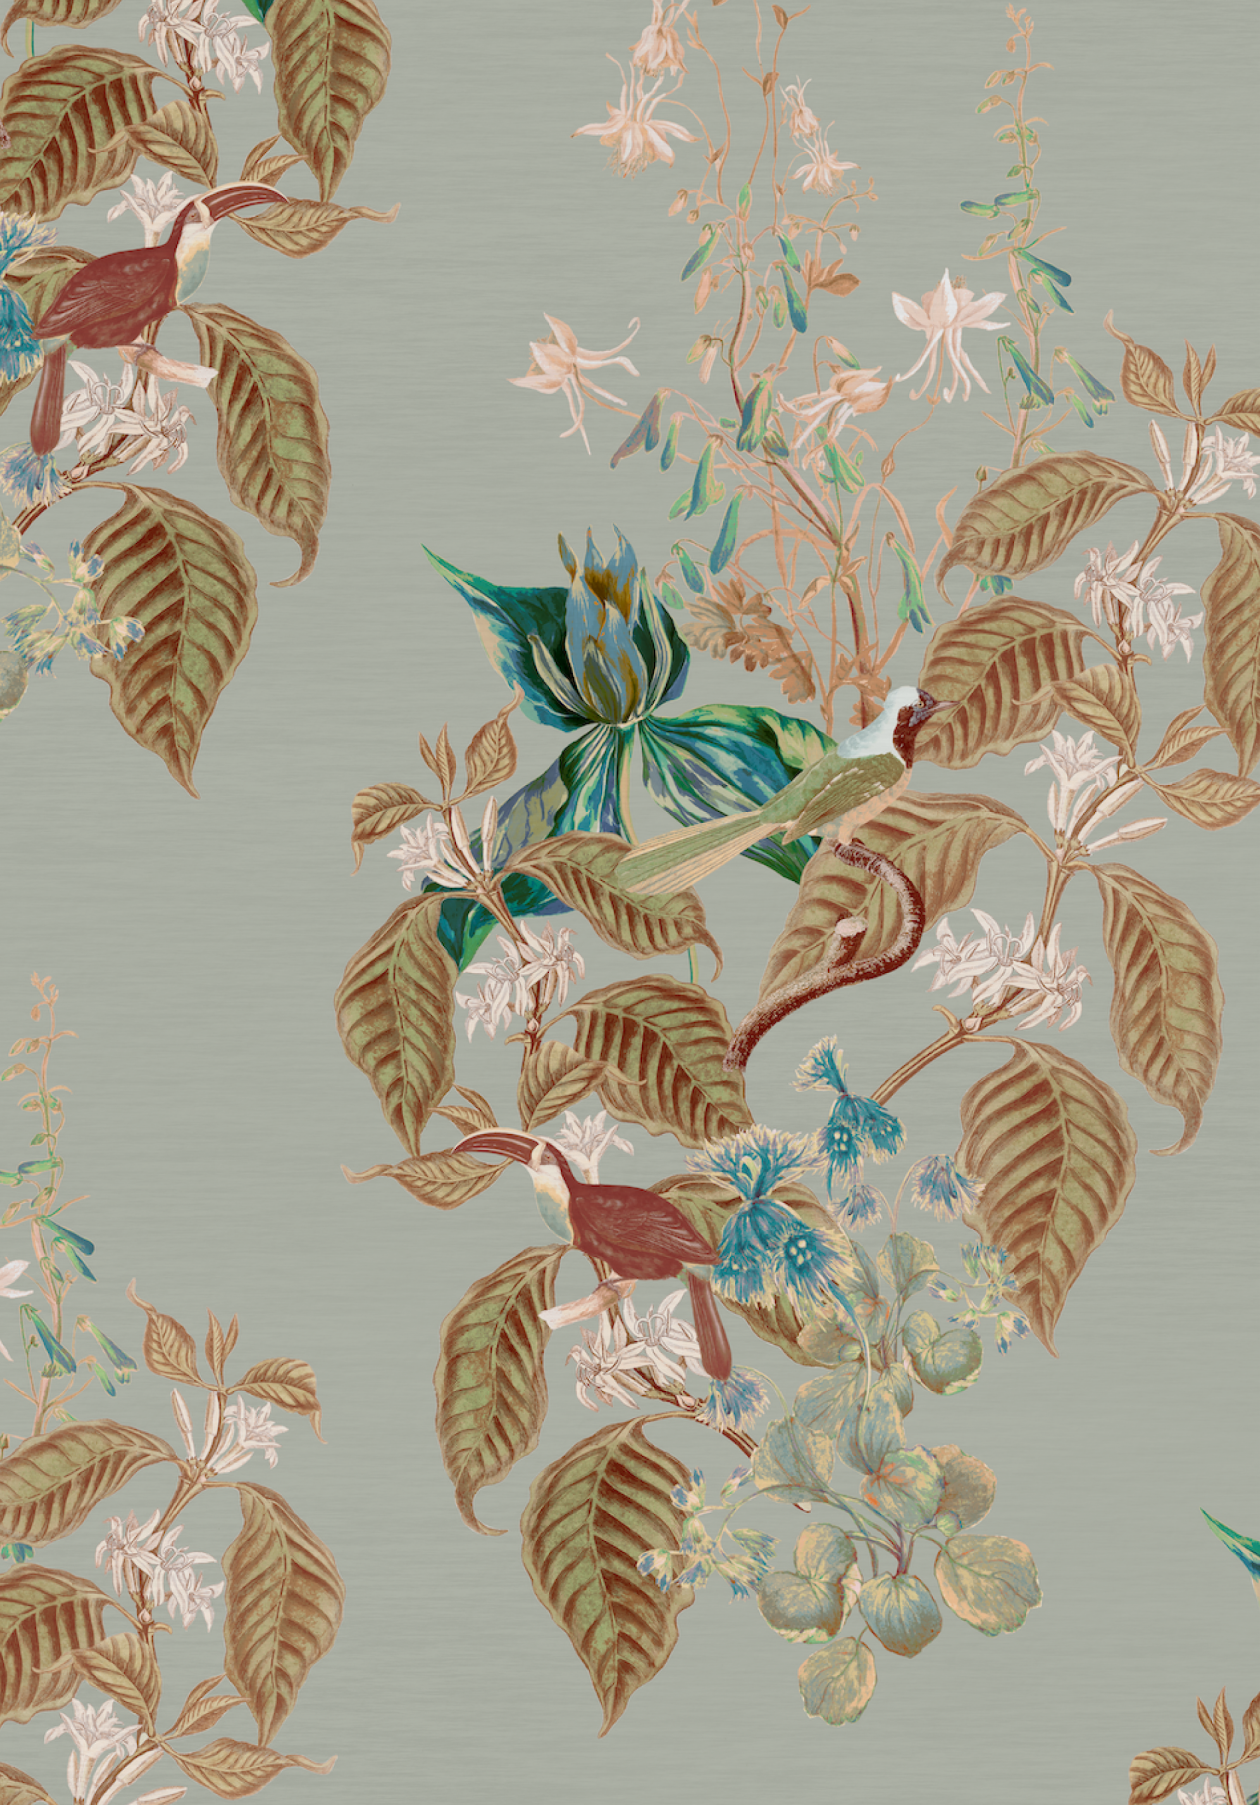 Blue Aviary Isle Wallpaper in Skylight by Deus ex Gardenia with birds and flowers.